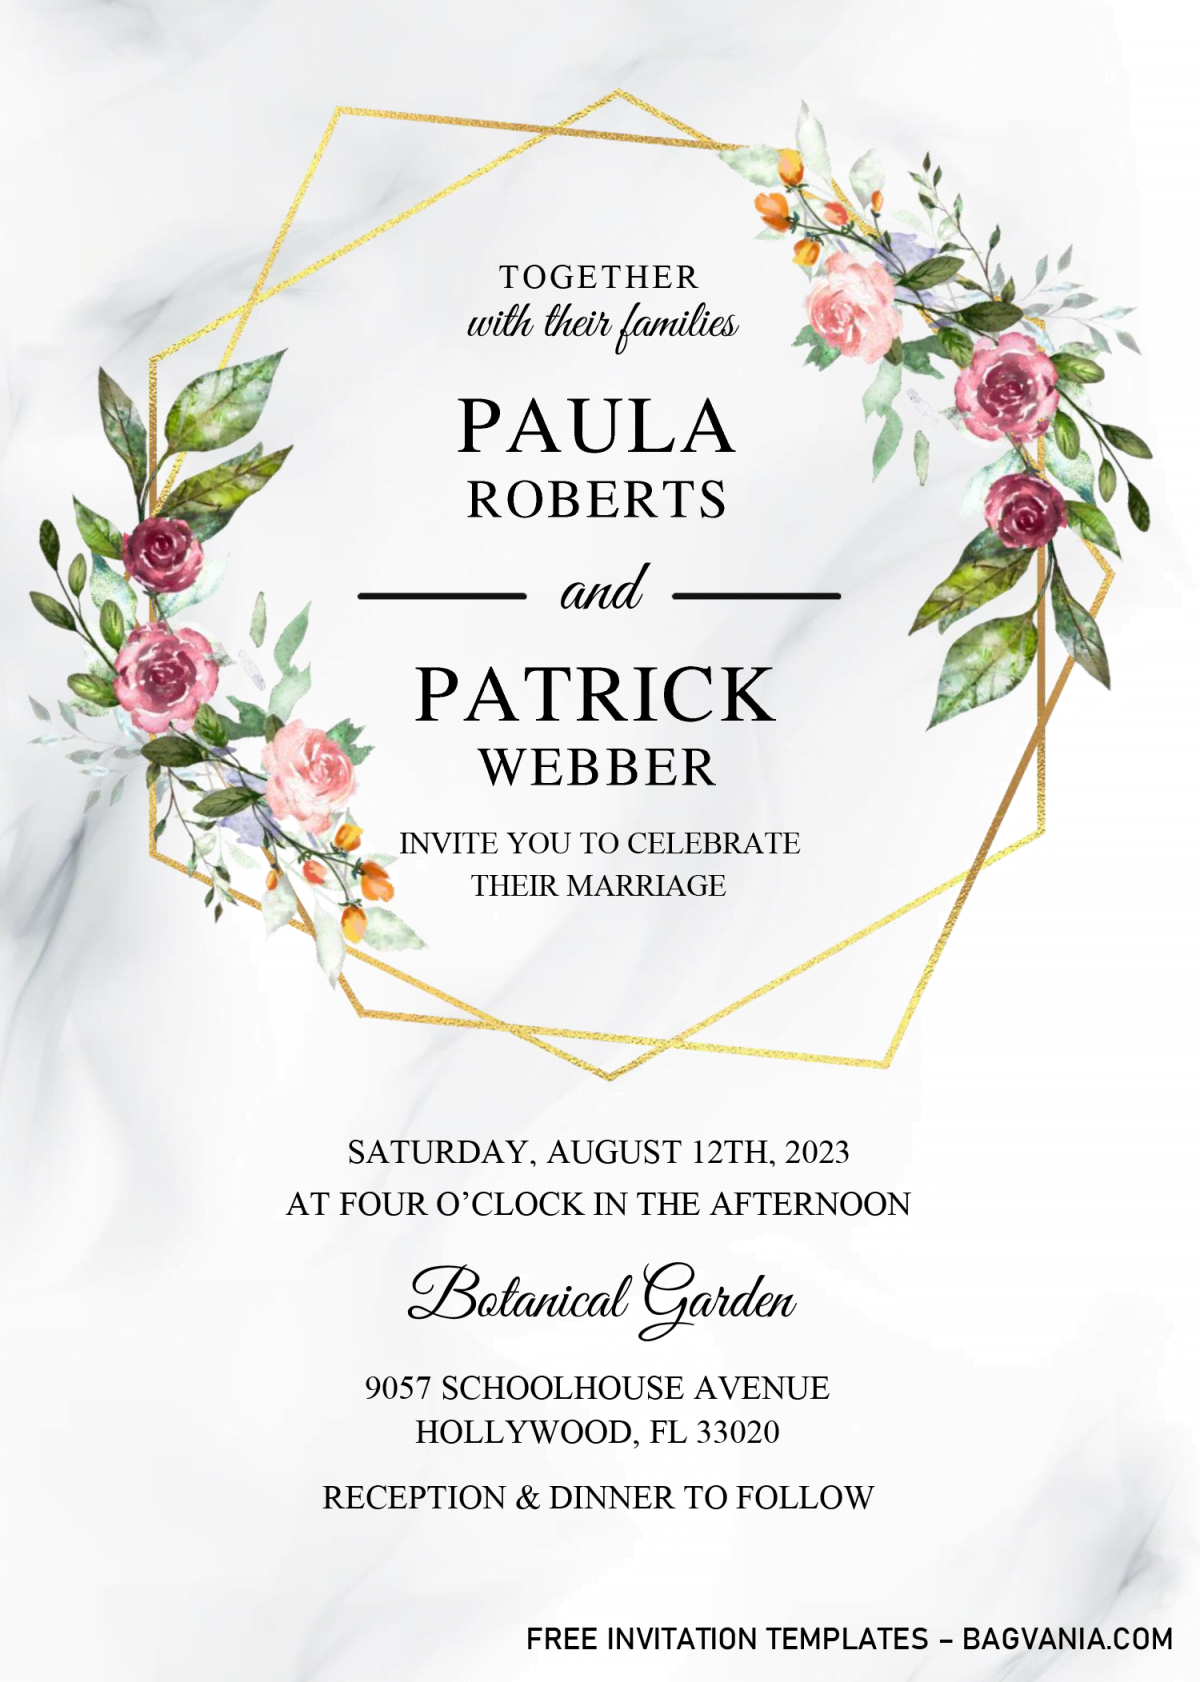 Gold Geometric Floral Invitation Templates - Editable With Microsoft Word and has white marble background